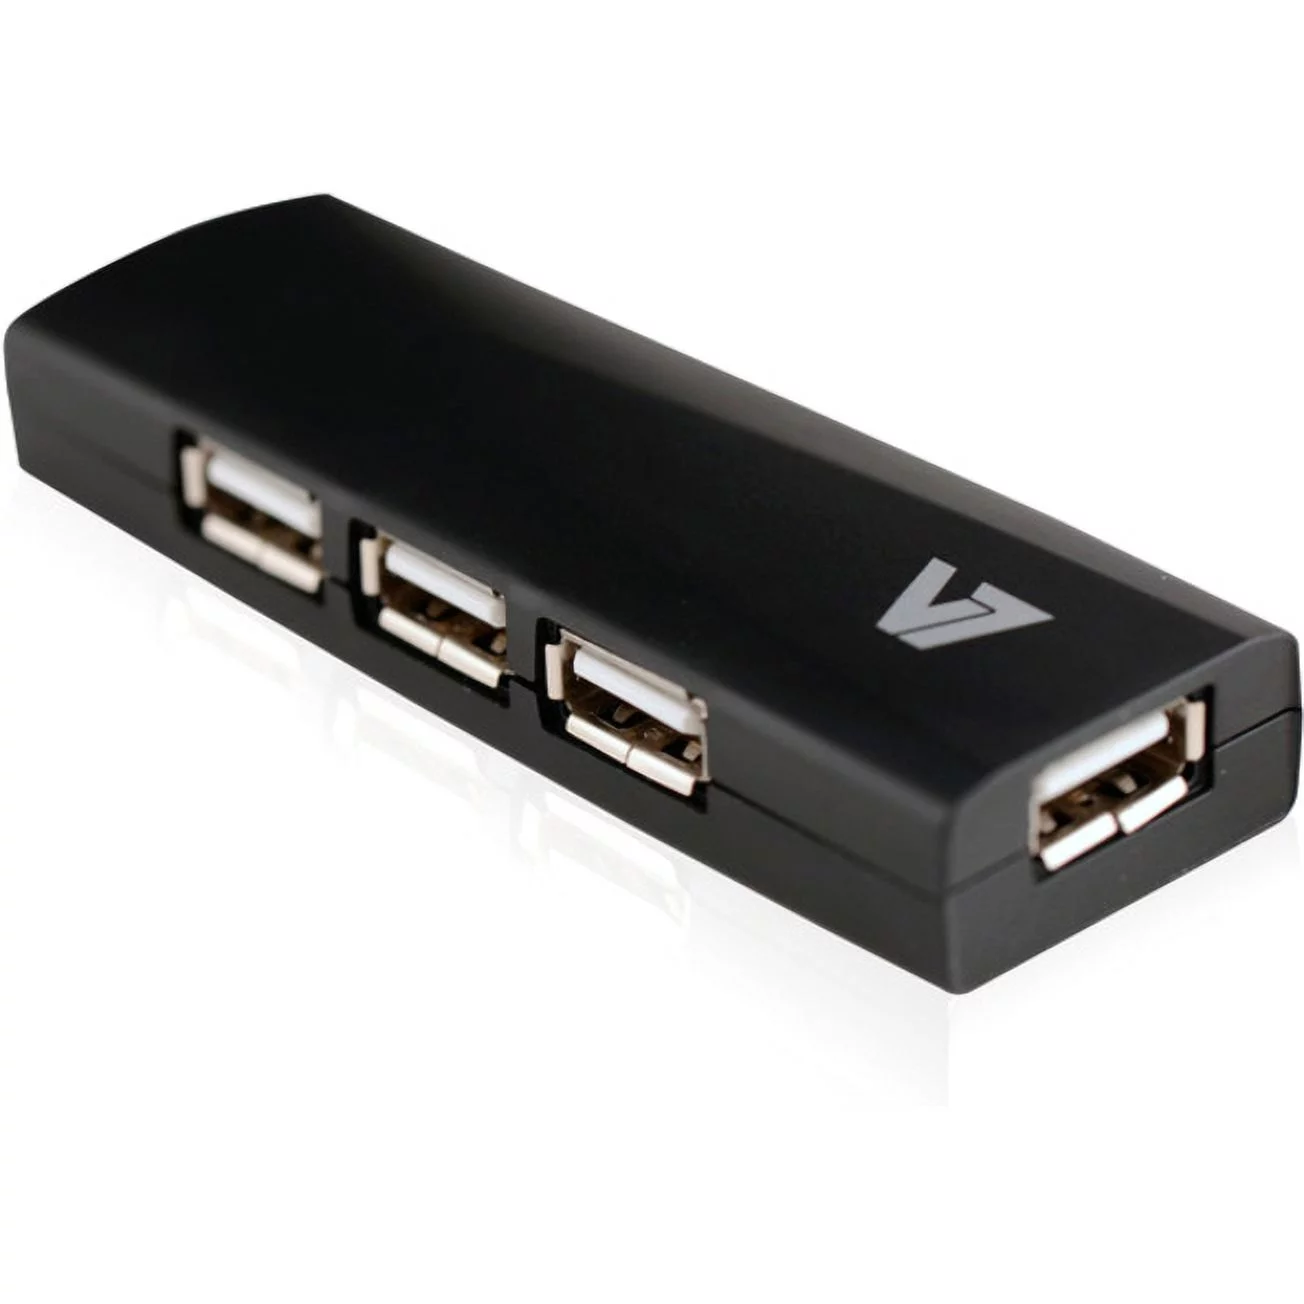 High Speed USB 2.0 Hub with 4 Ports and Power Supply